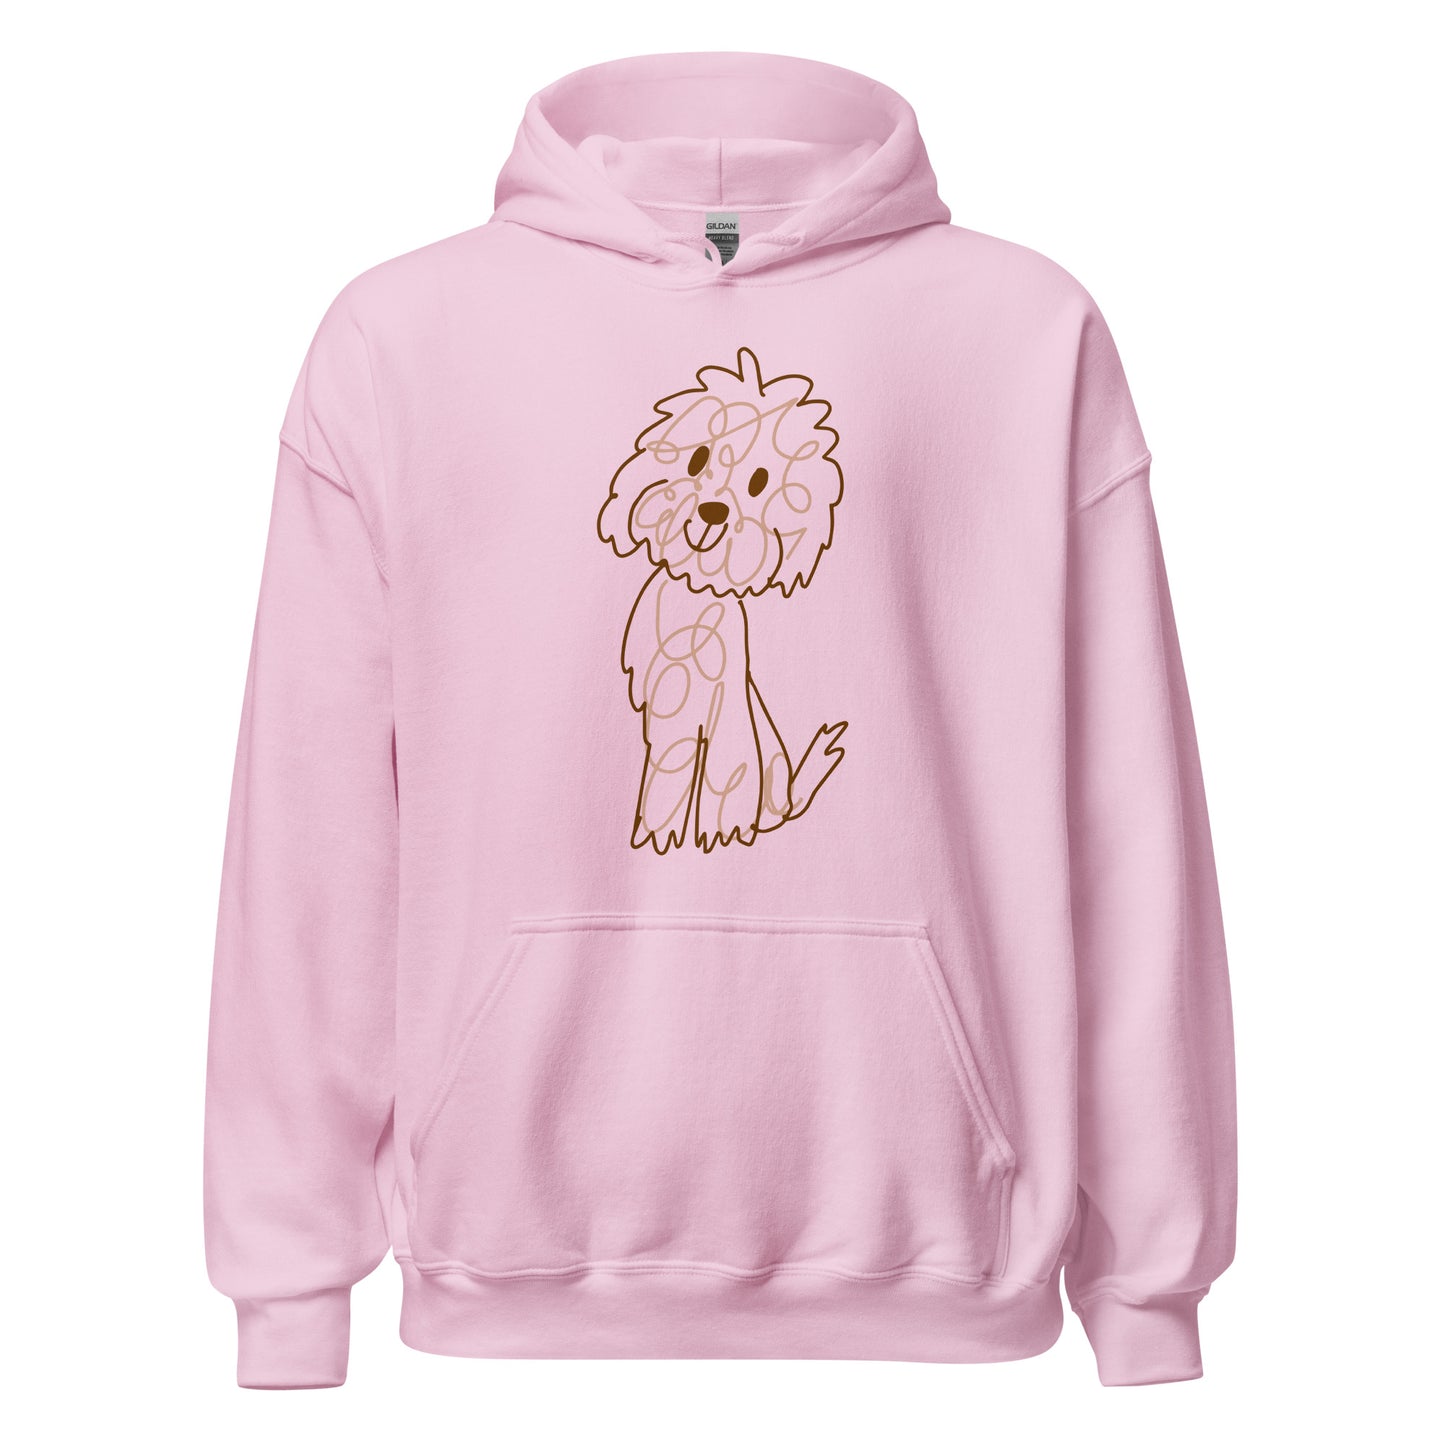 Hoodie with doodle dog drawn with fine lines light pink color